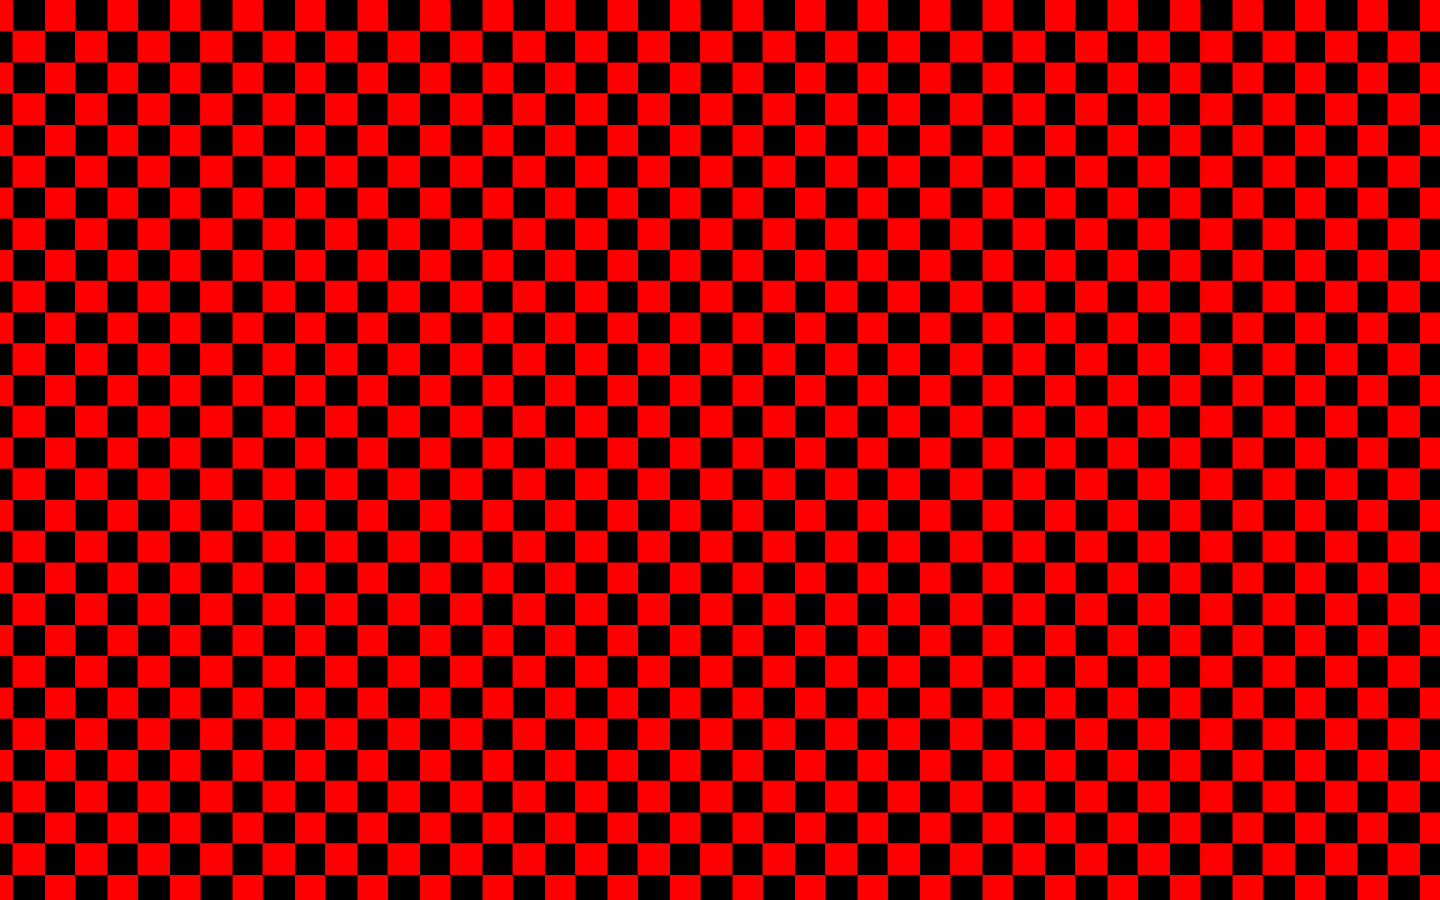 Free download Red Black Checkers Desktop Wallpaper is easy Just